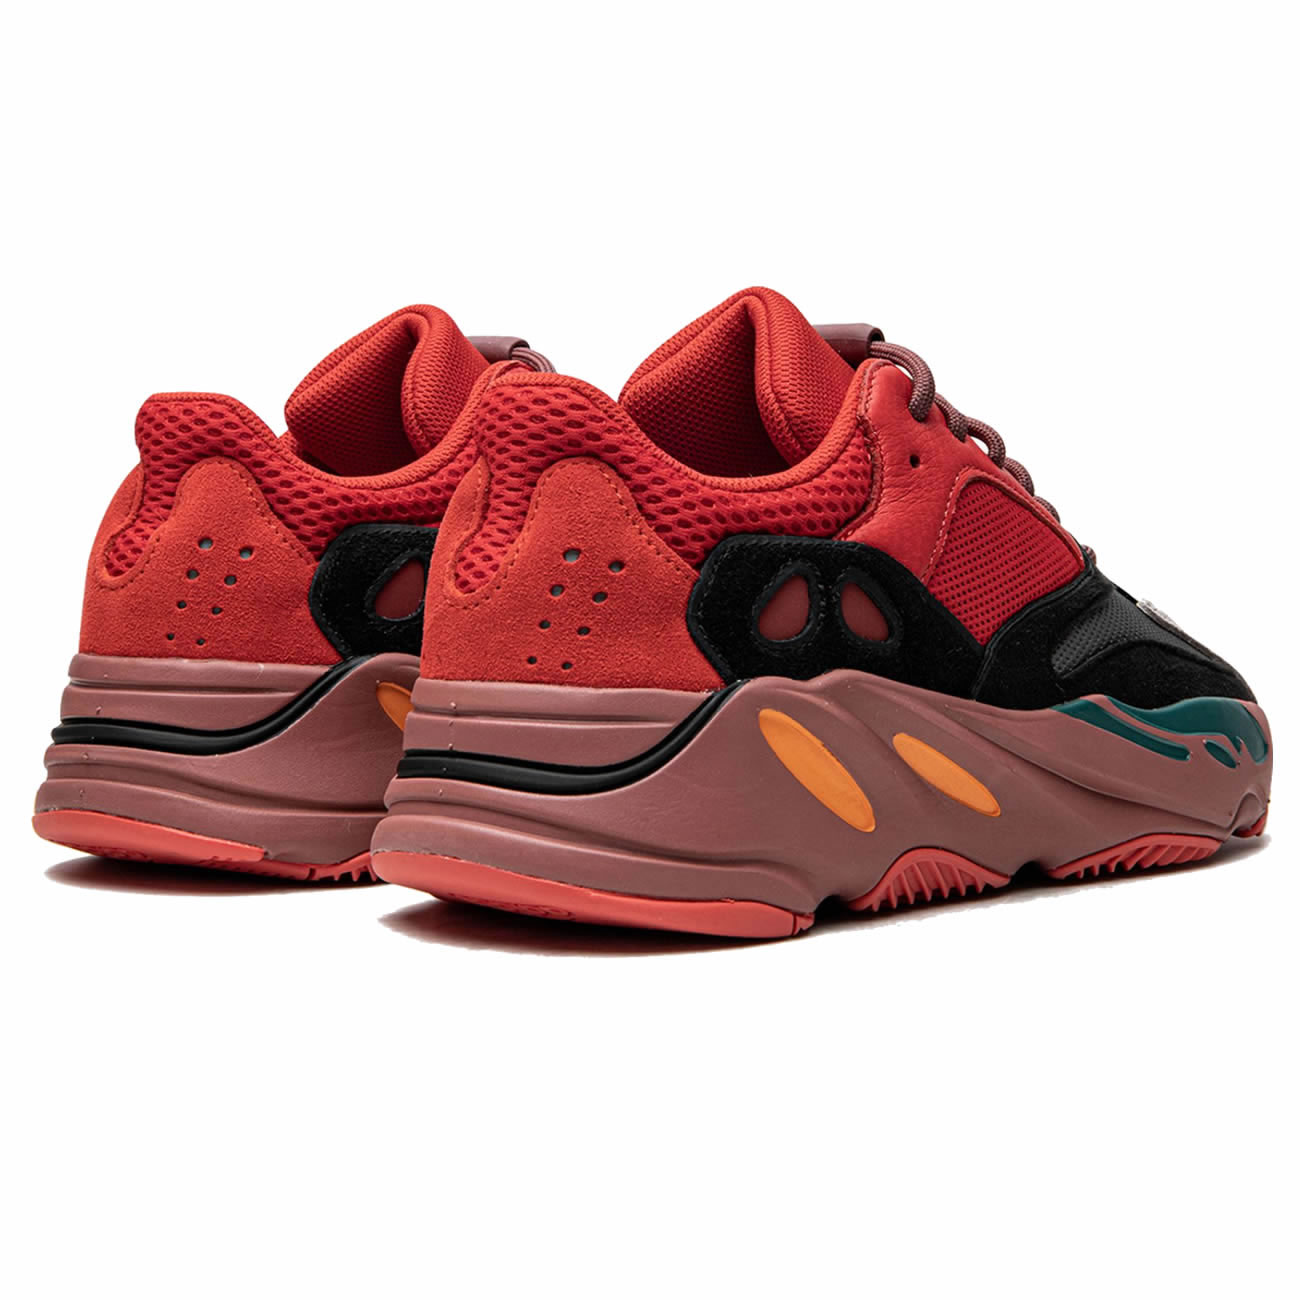 adidas Yeezy Boost 700 Hi-Res-Red HQ6979